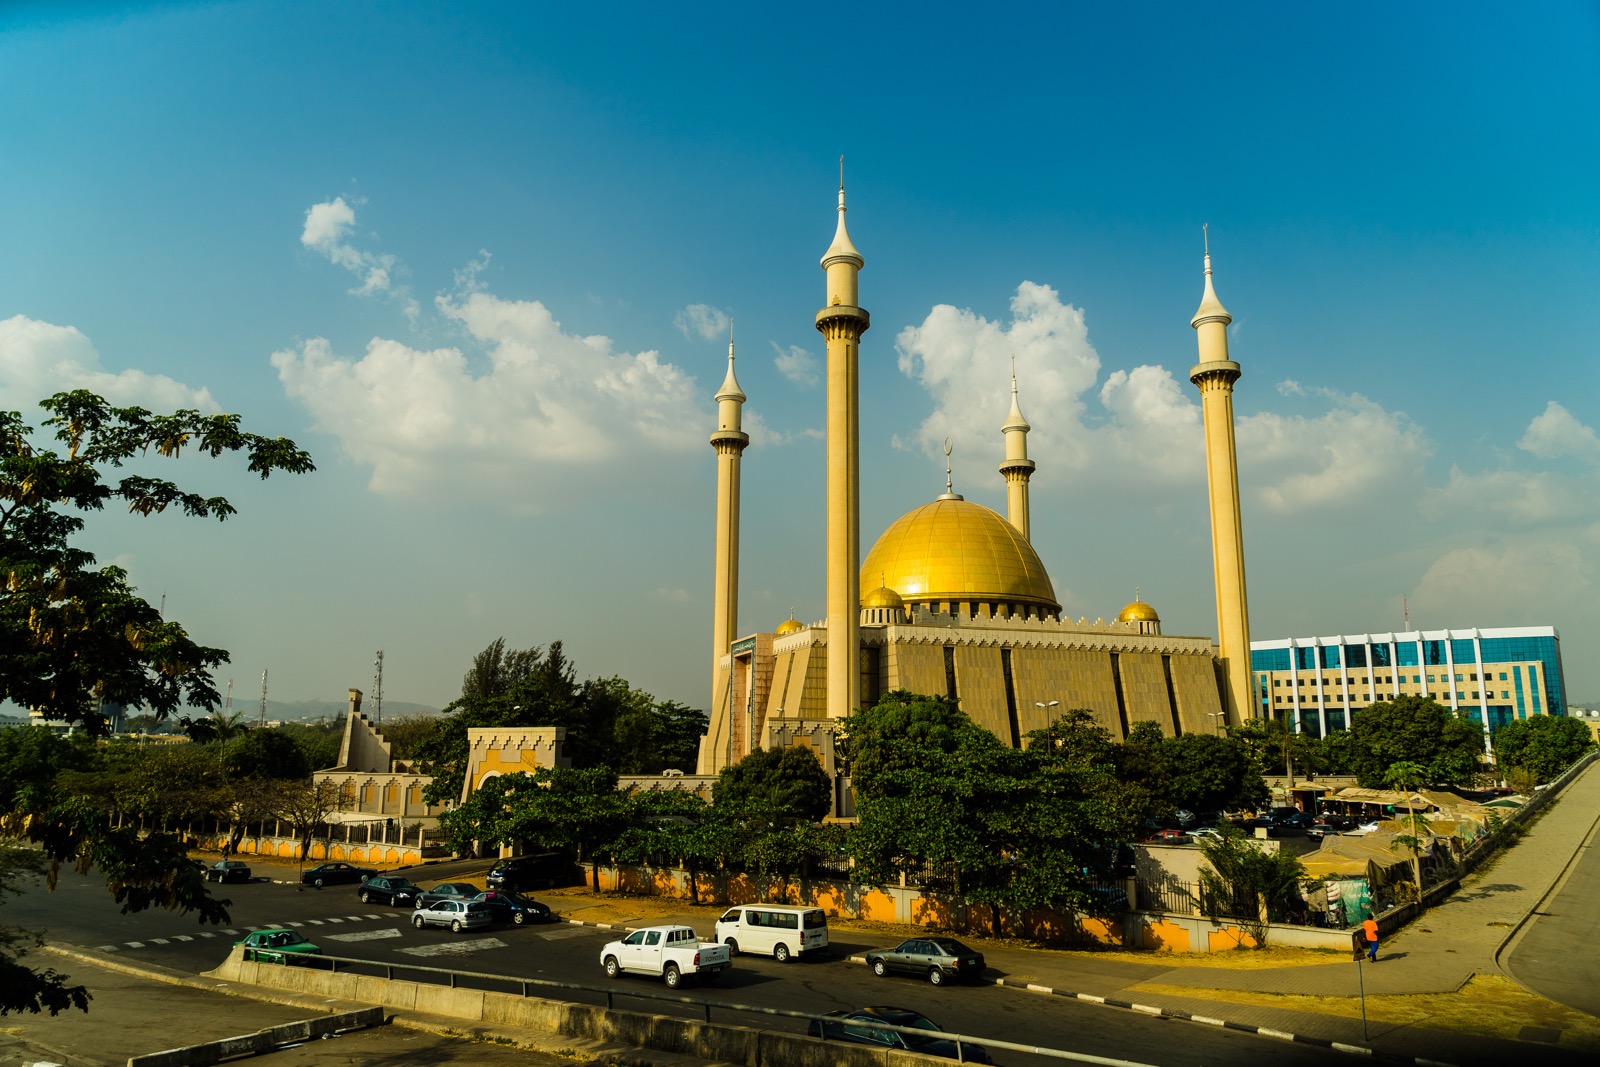 This City-Country Matching Quiz Gets Progressively Harder With Each Question – Can You Keep up With It? Abuja National Mosque, Nigeria